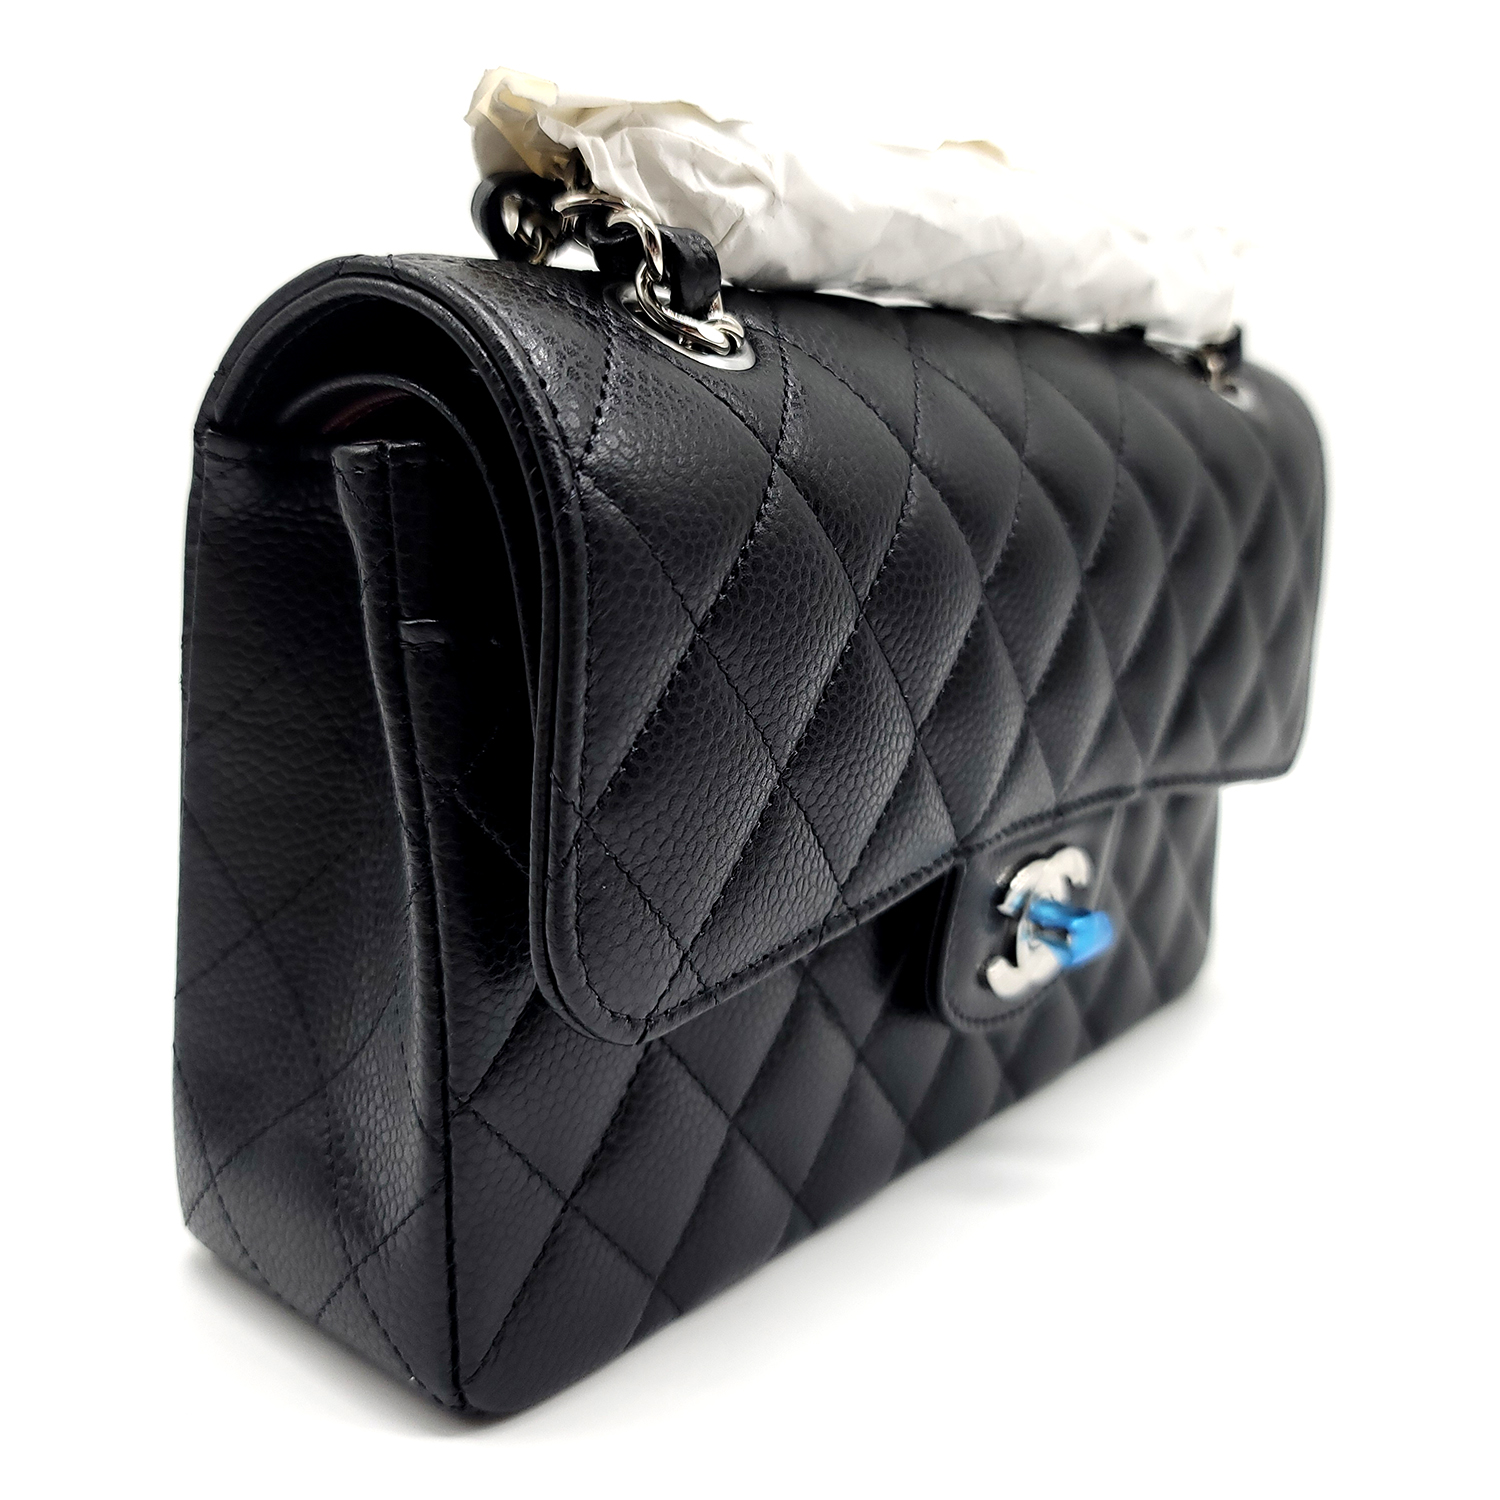 CHANEL Caviar Quilted Small Messenger Flap Black 1250968